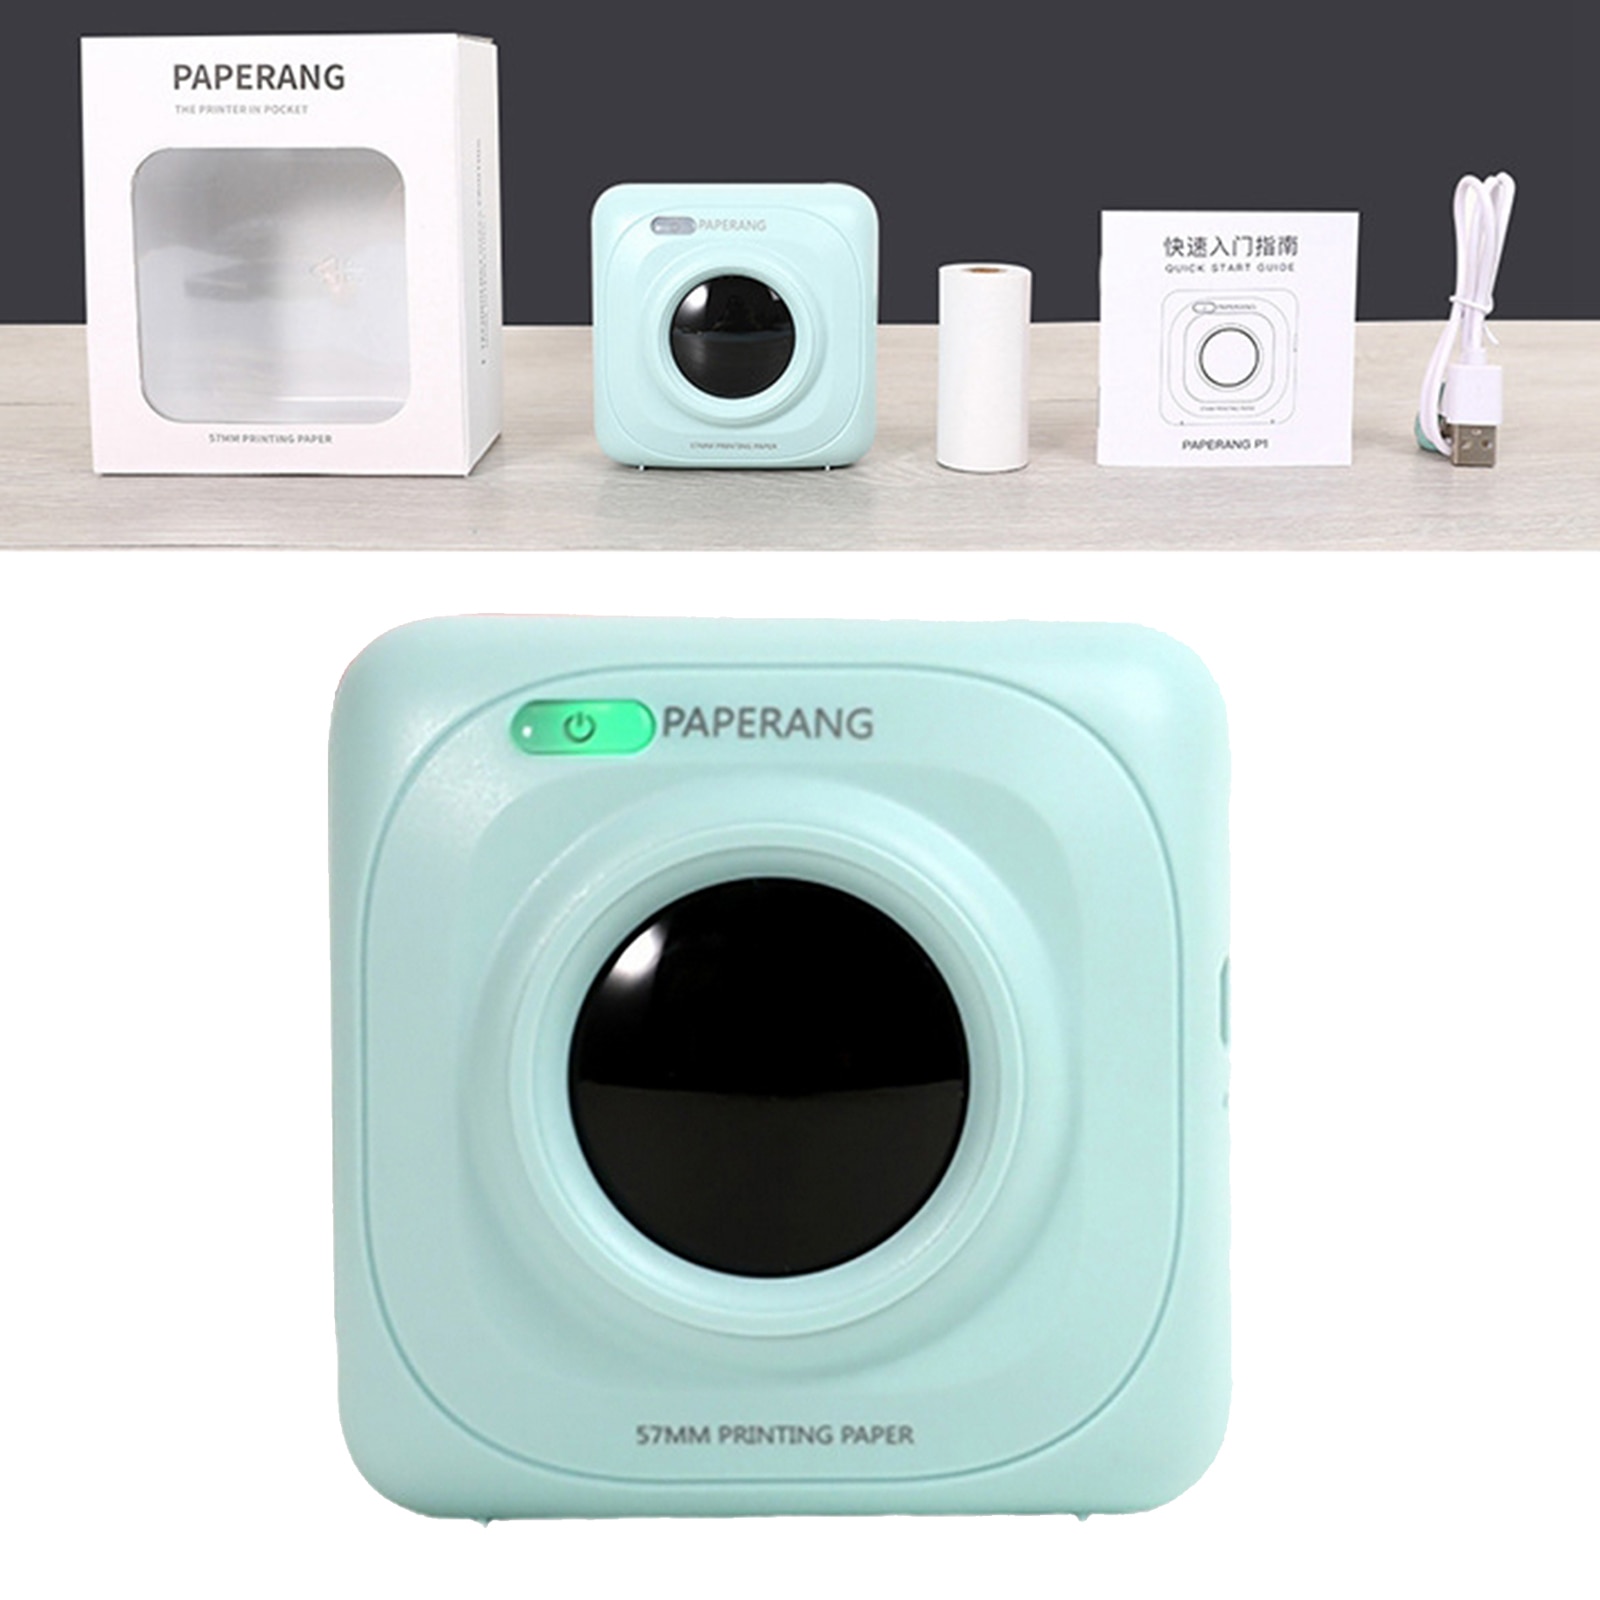 PAPERANG Portable Thermal Printer Photo Picture HD Thermal Label Printer for iOS Android Wireless Connection Bluetooth Printer